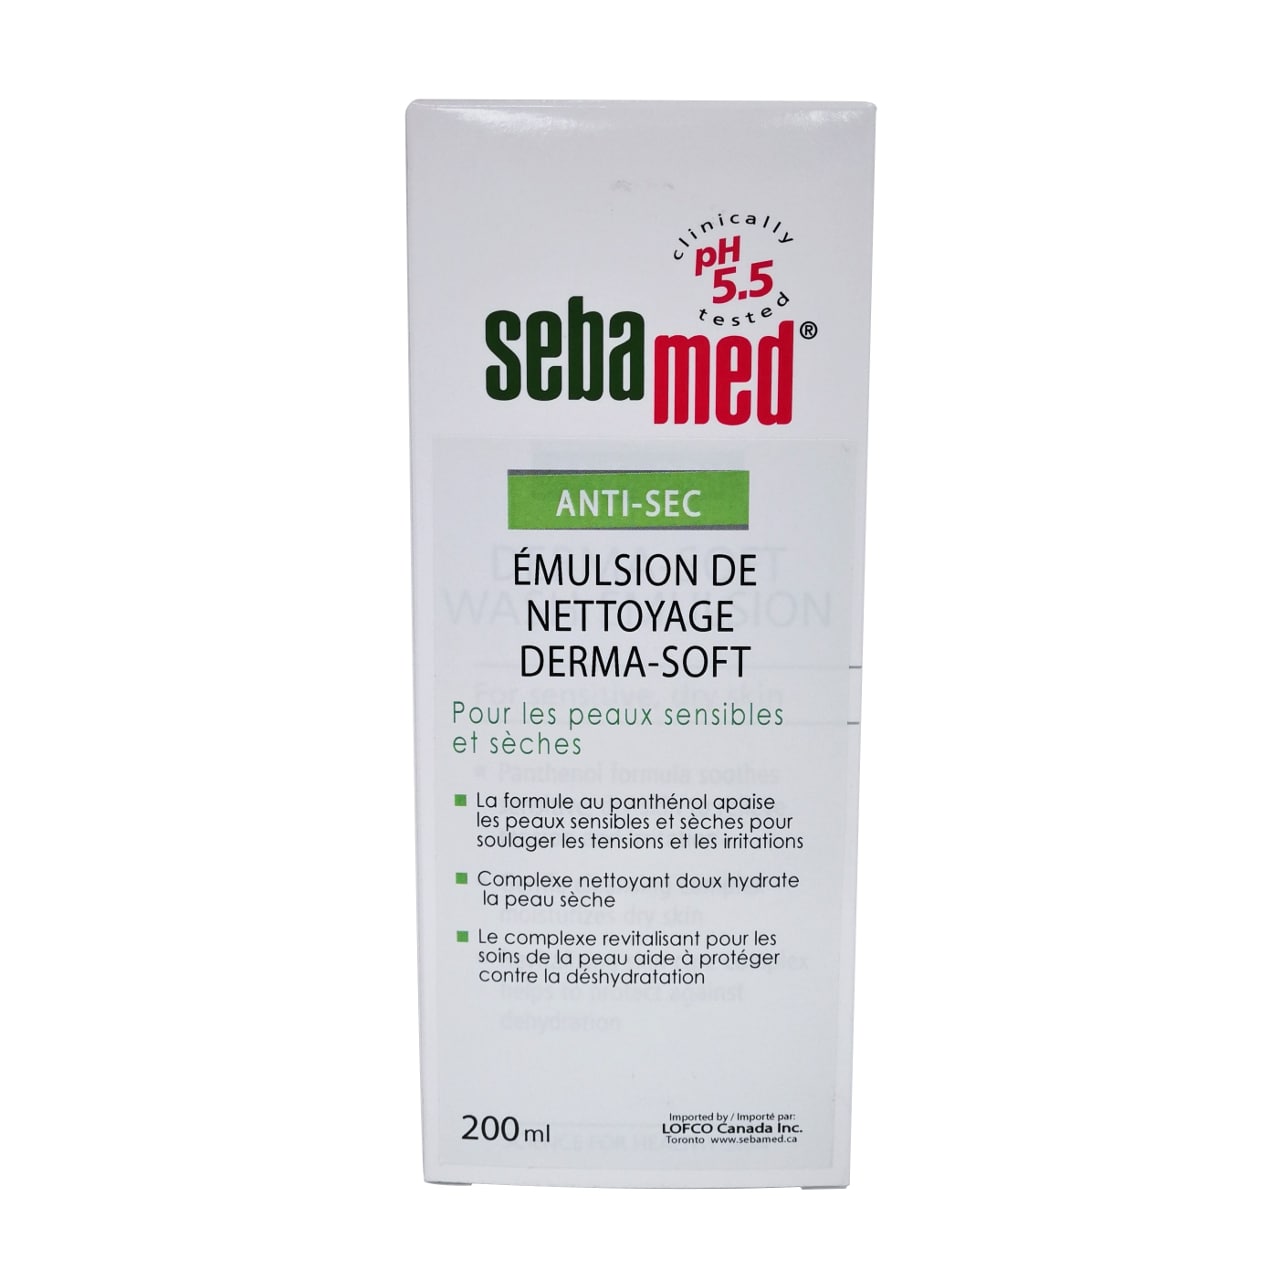 Product label for Sebamed Anti-Dry Derma-Soft Wash Emulsion in French